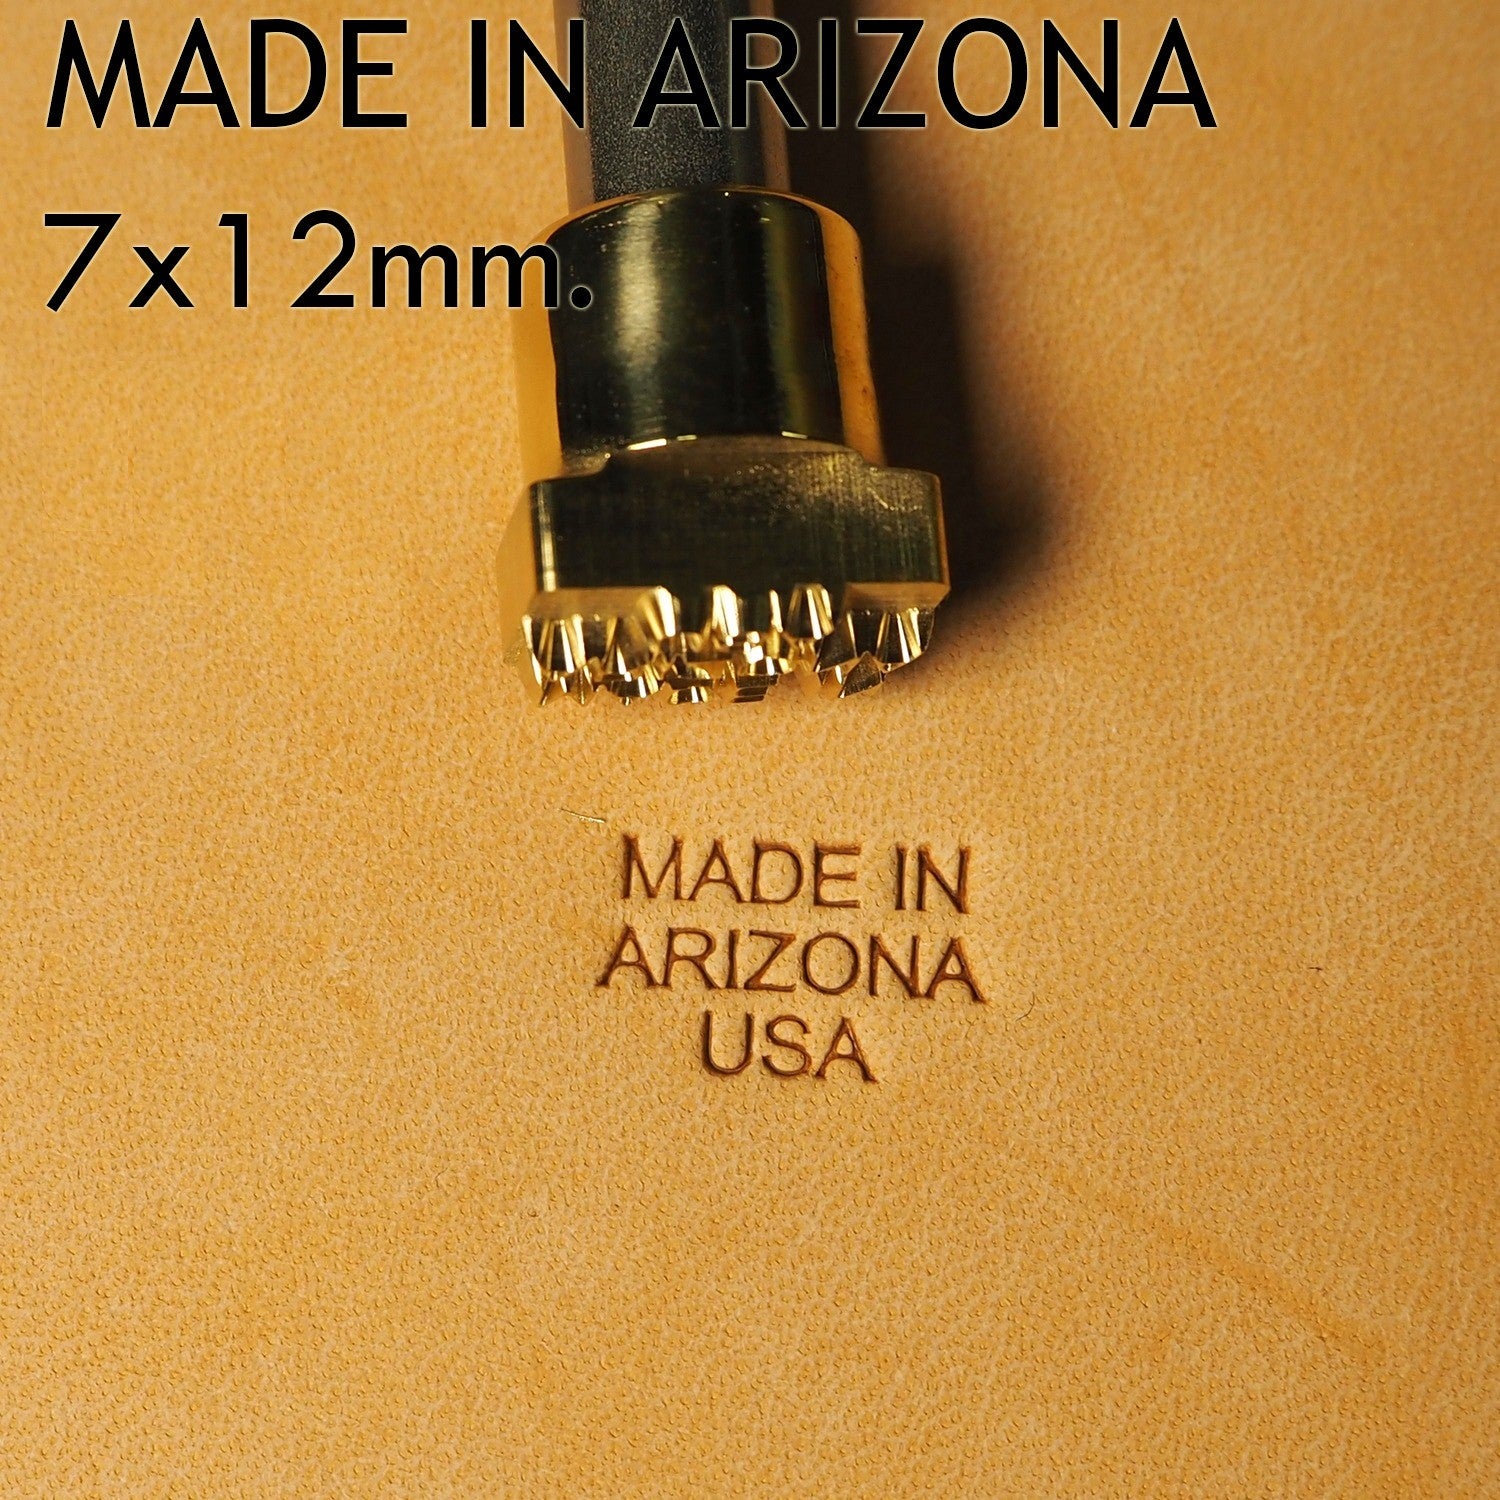 #Made In Arizona USA - Leather Crafting Stamp Tool